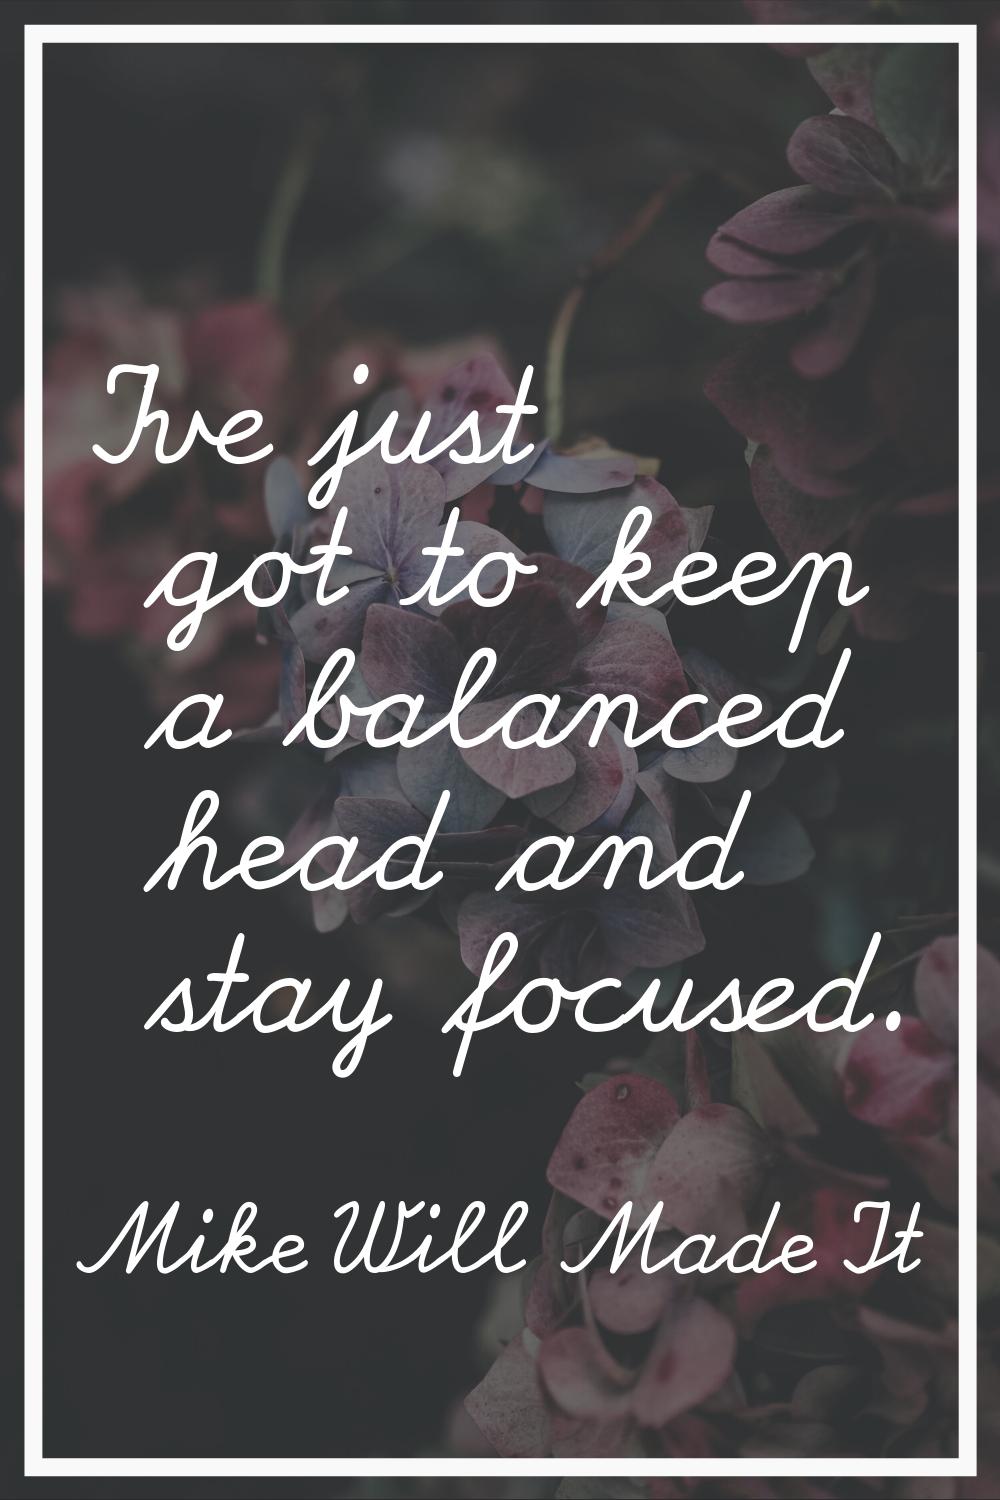 I've just got to keep a balanced head and stay focused.